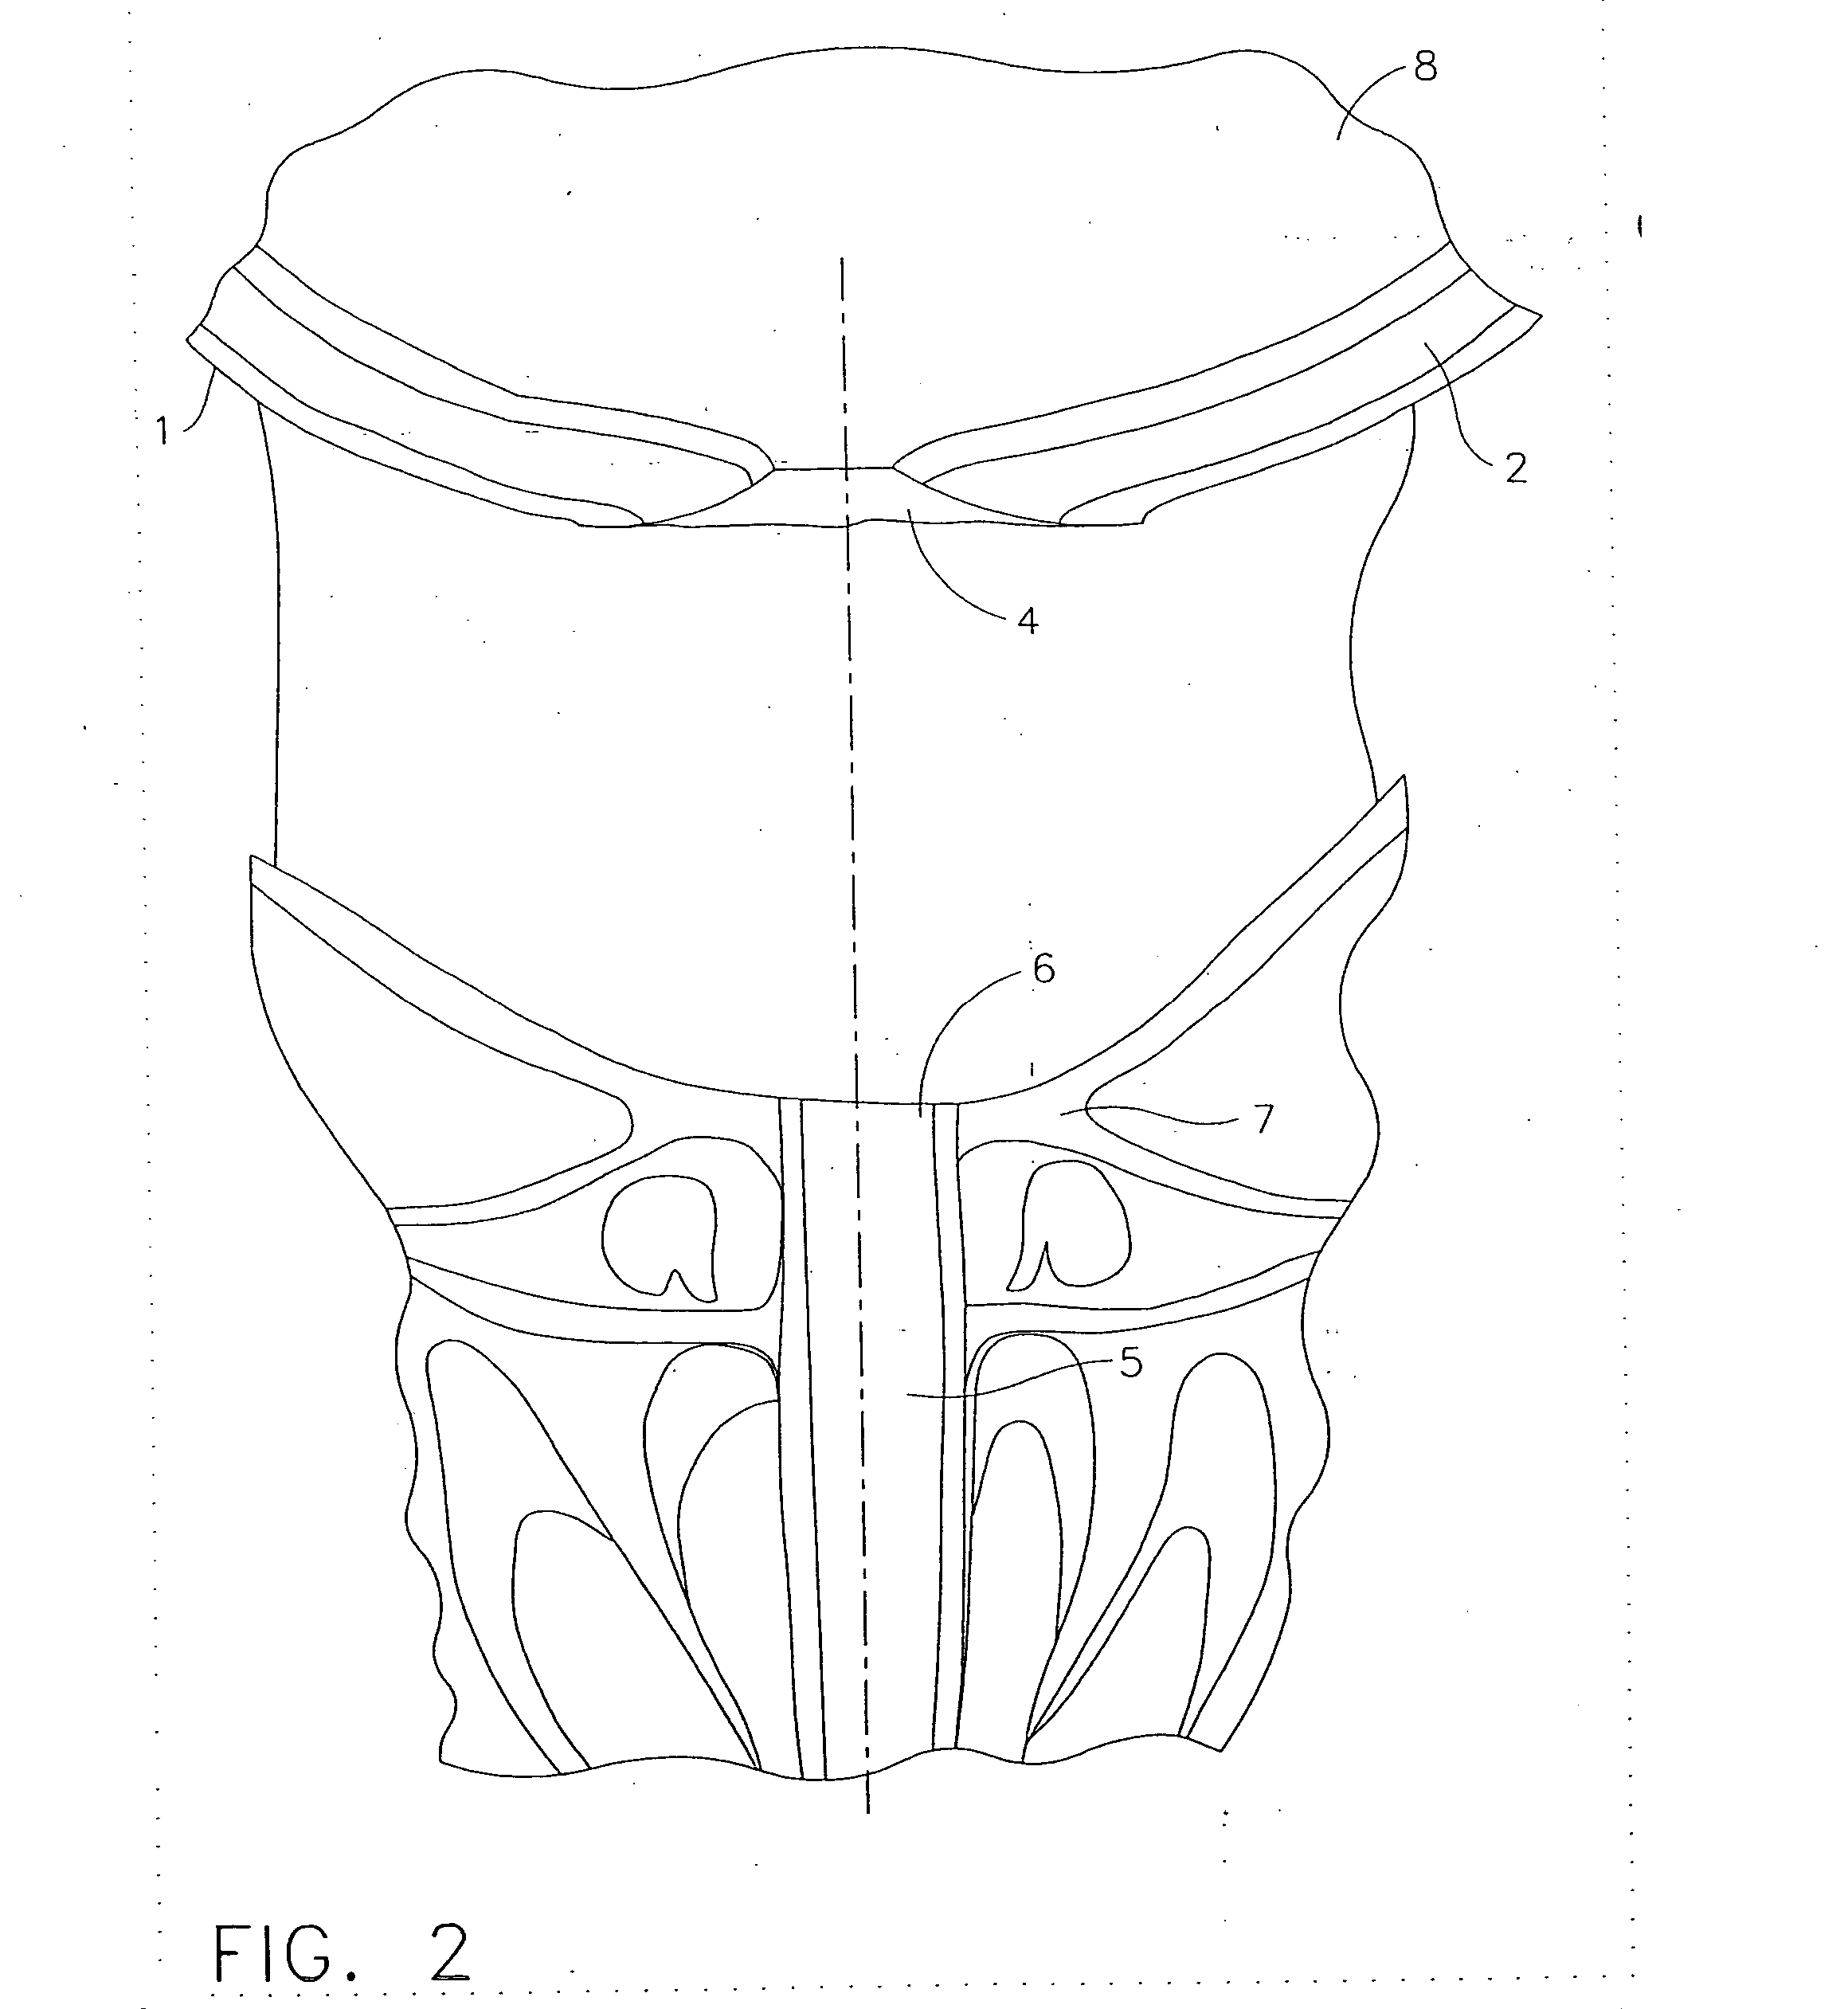 Anchors for use in attachment of bladder tissues to pelvic floor tissues following a prostatectomy